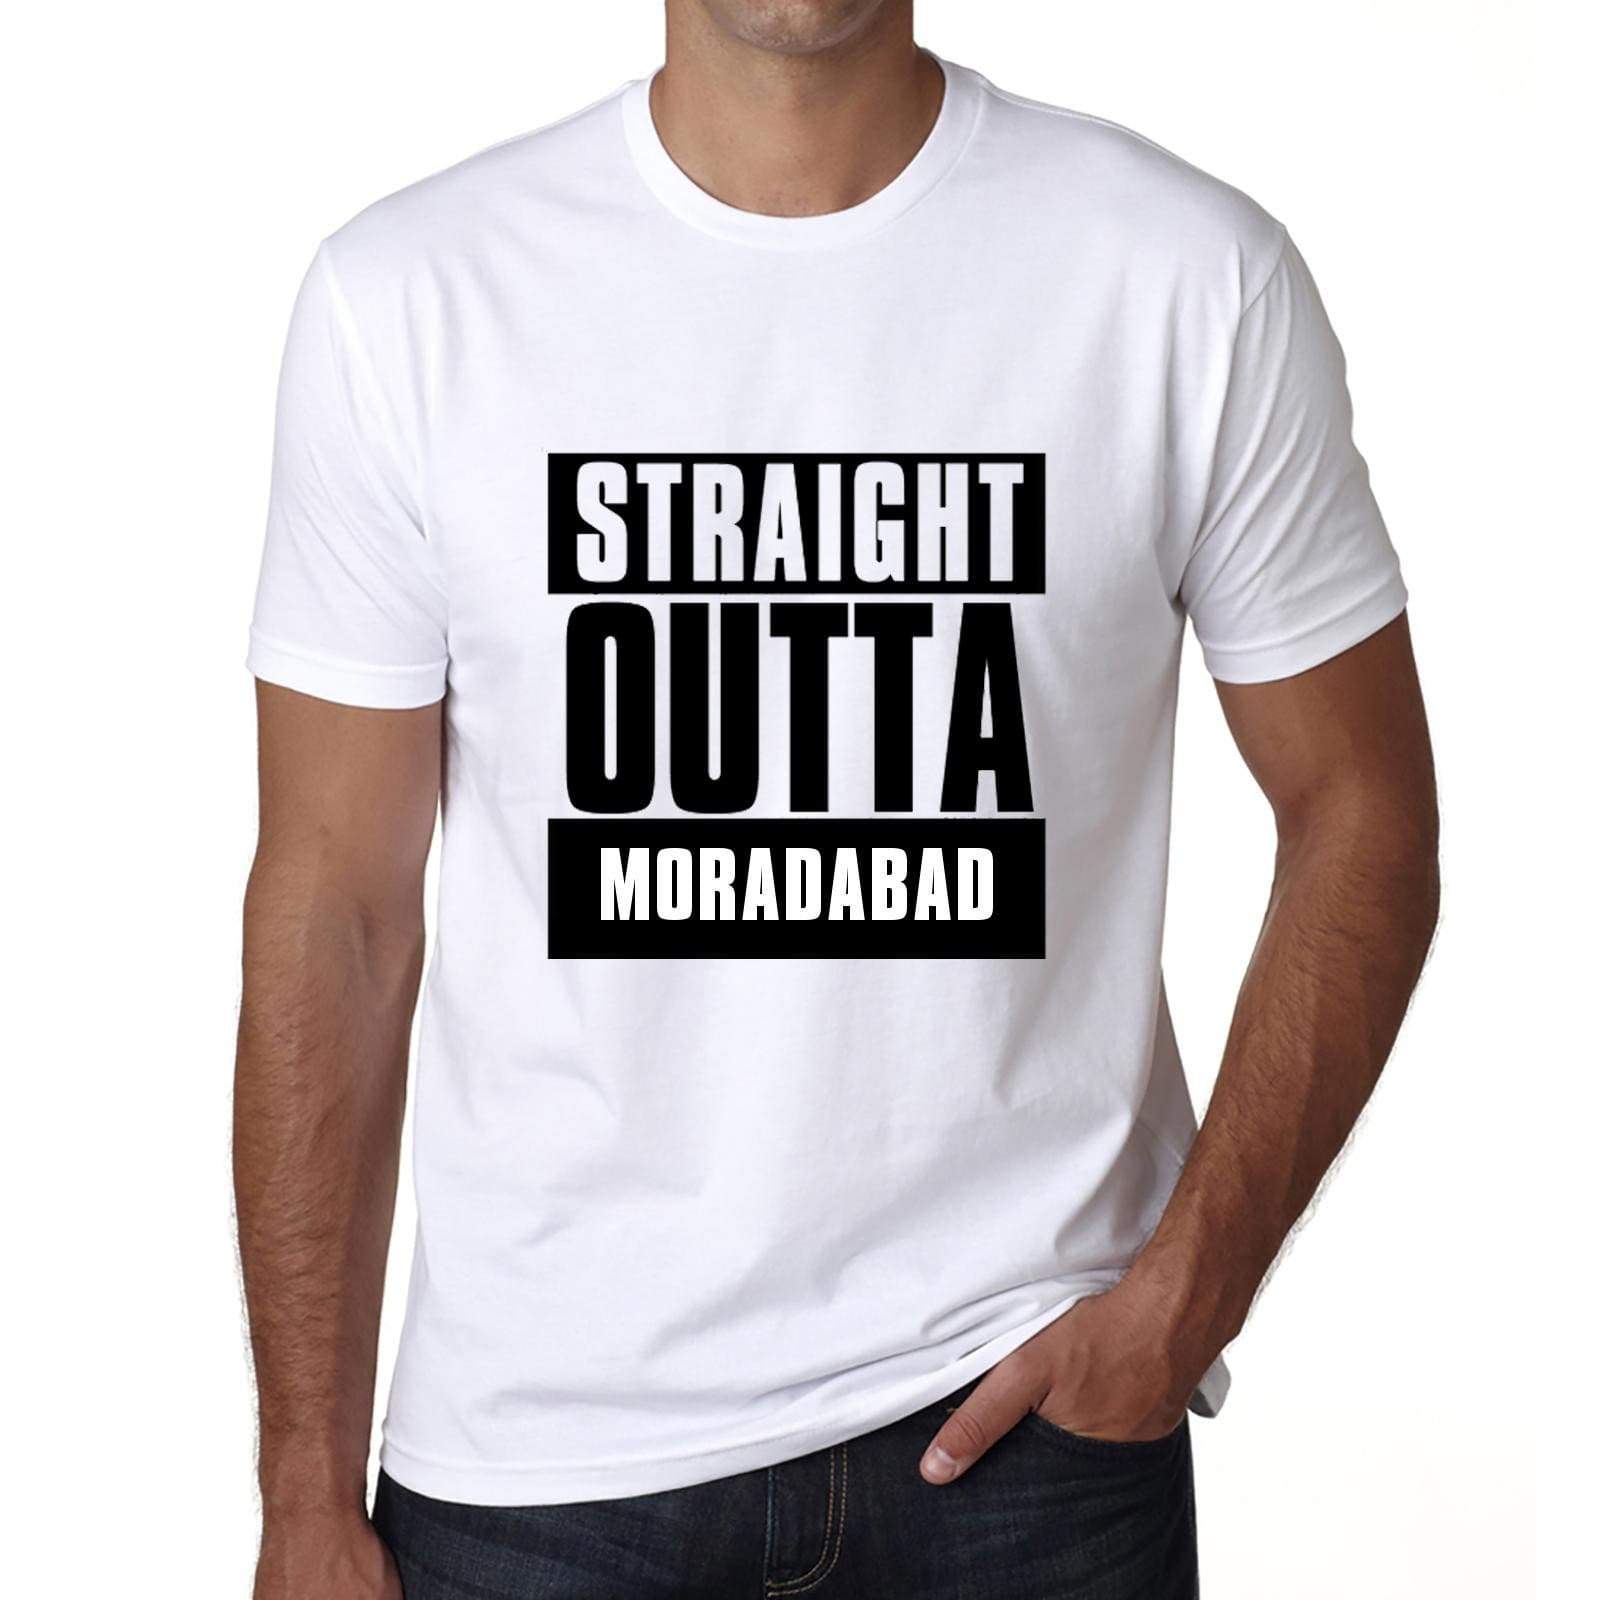 Straight Outta Moradabad Mens Short Sleeve Round Neck T-Shirt 00027 - White / S - Casual